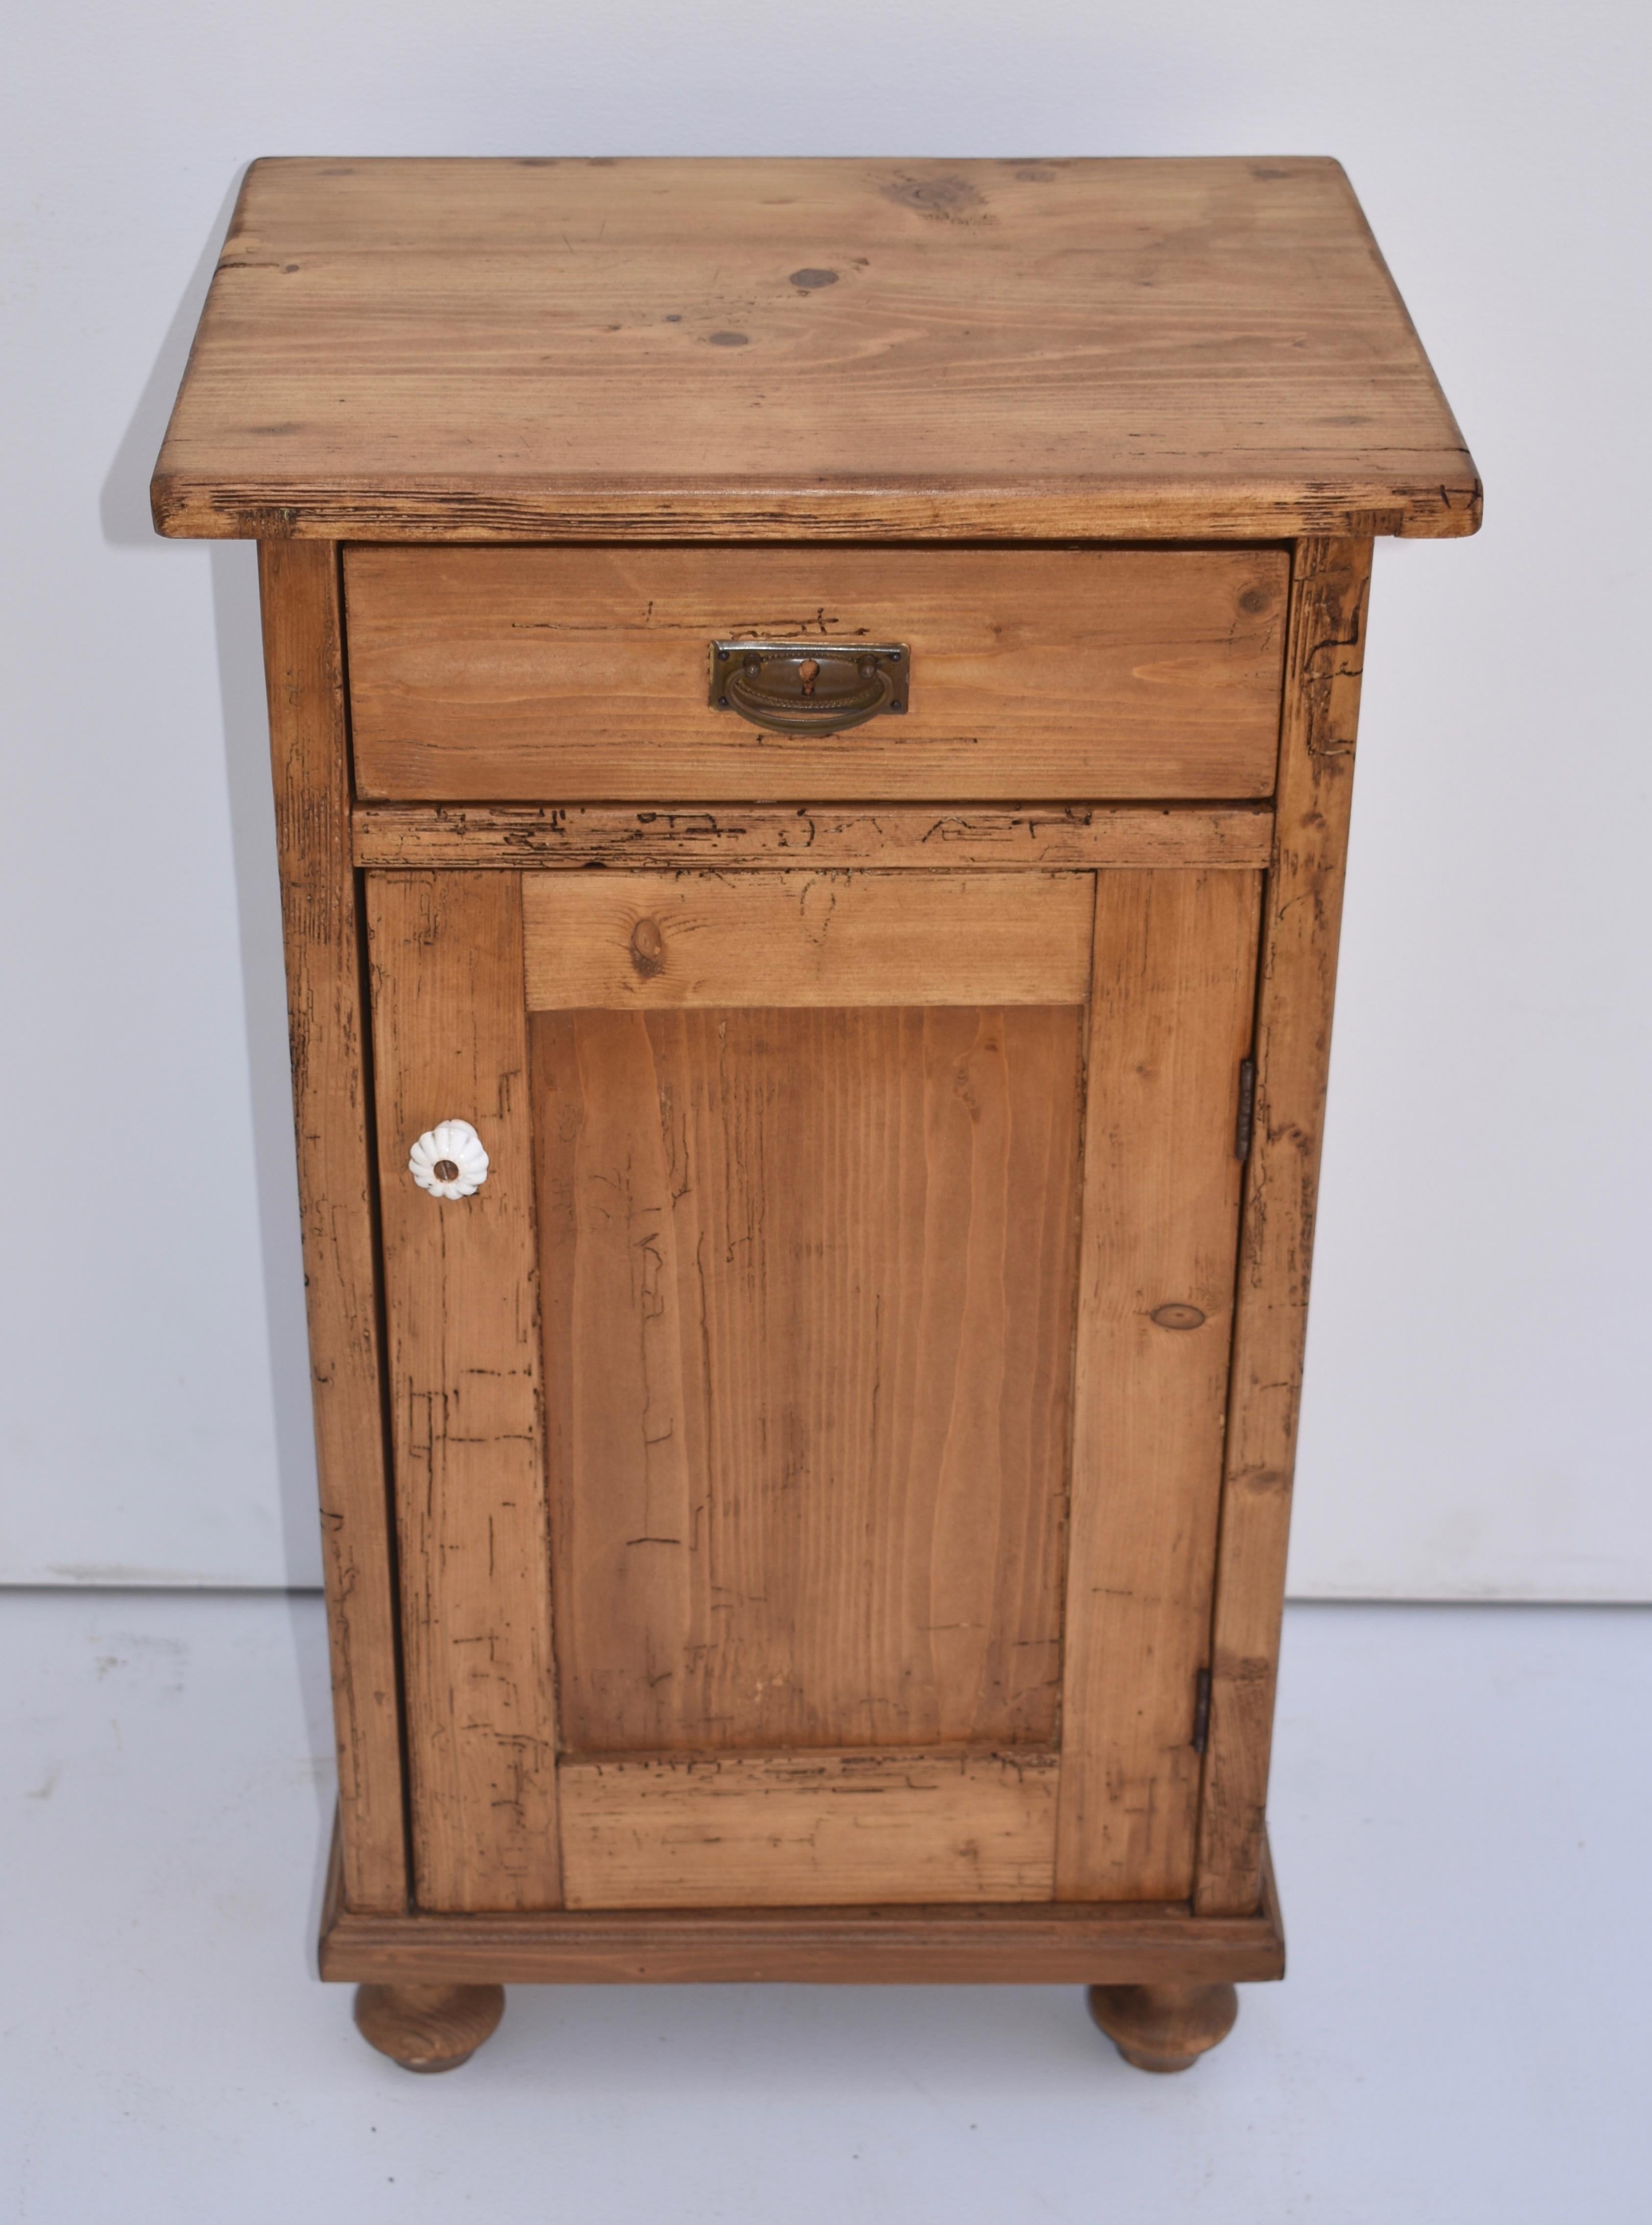 This single nightstand has one hand-cut dovetailed drawer and one paneled door, with a single shelf inside. It has significant attractive inactive woodworm tracks.